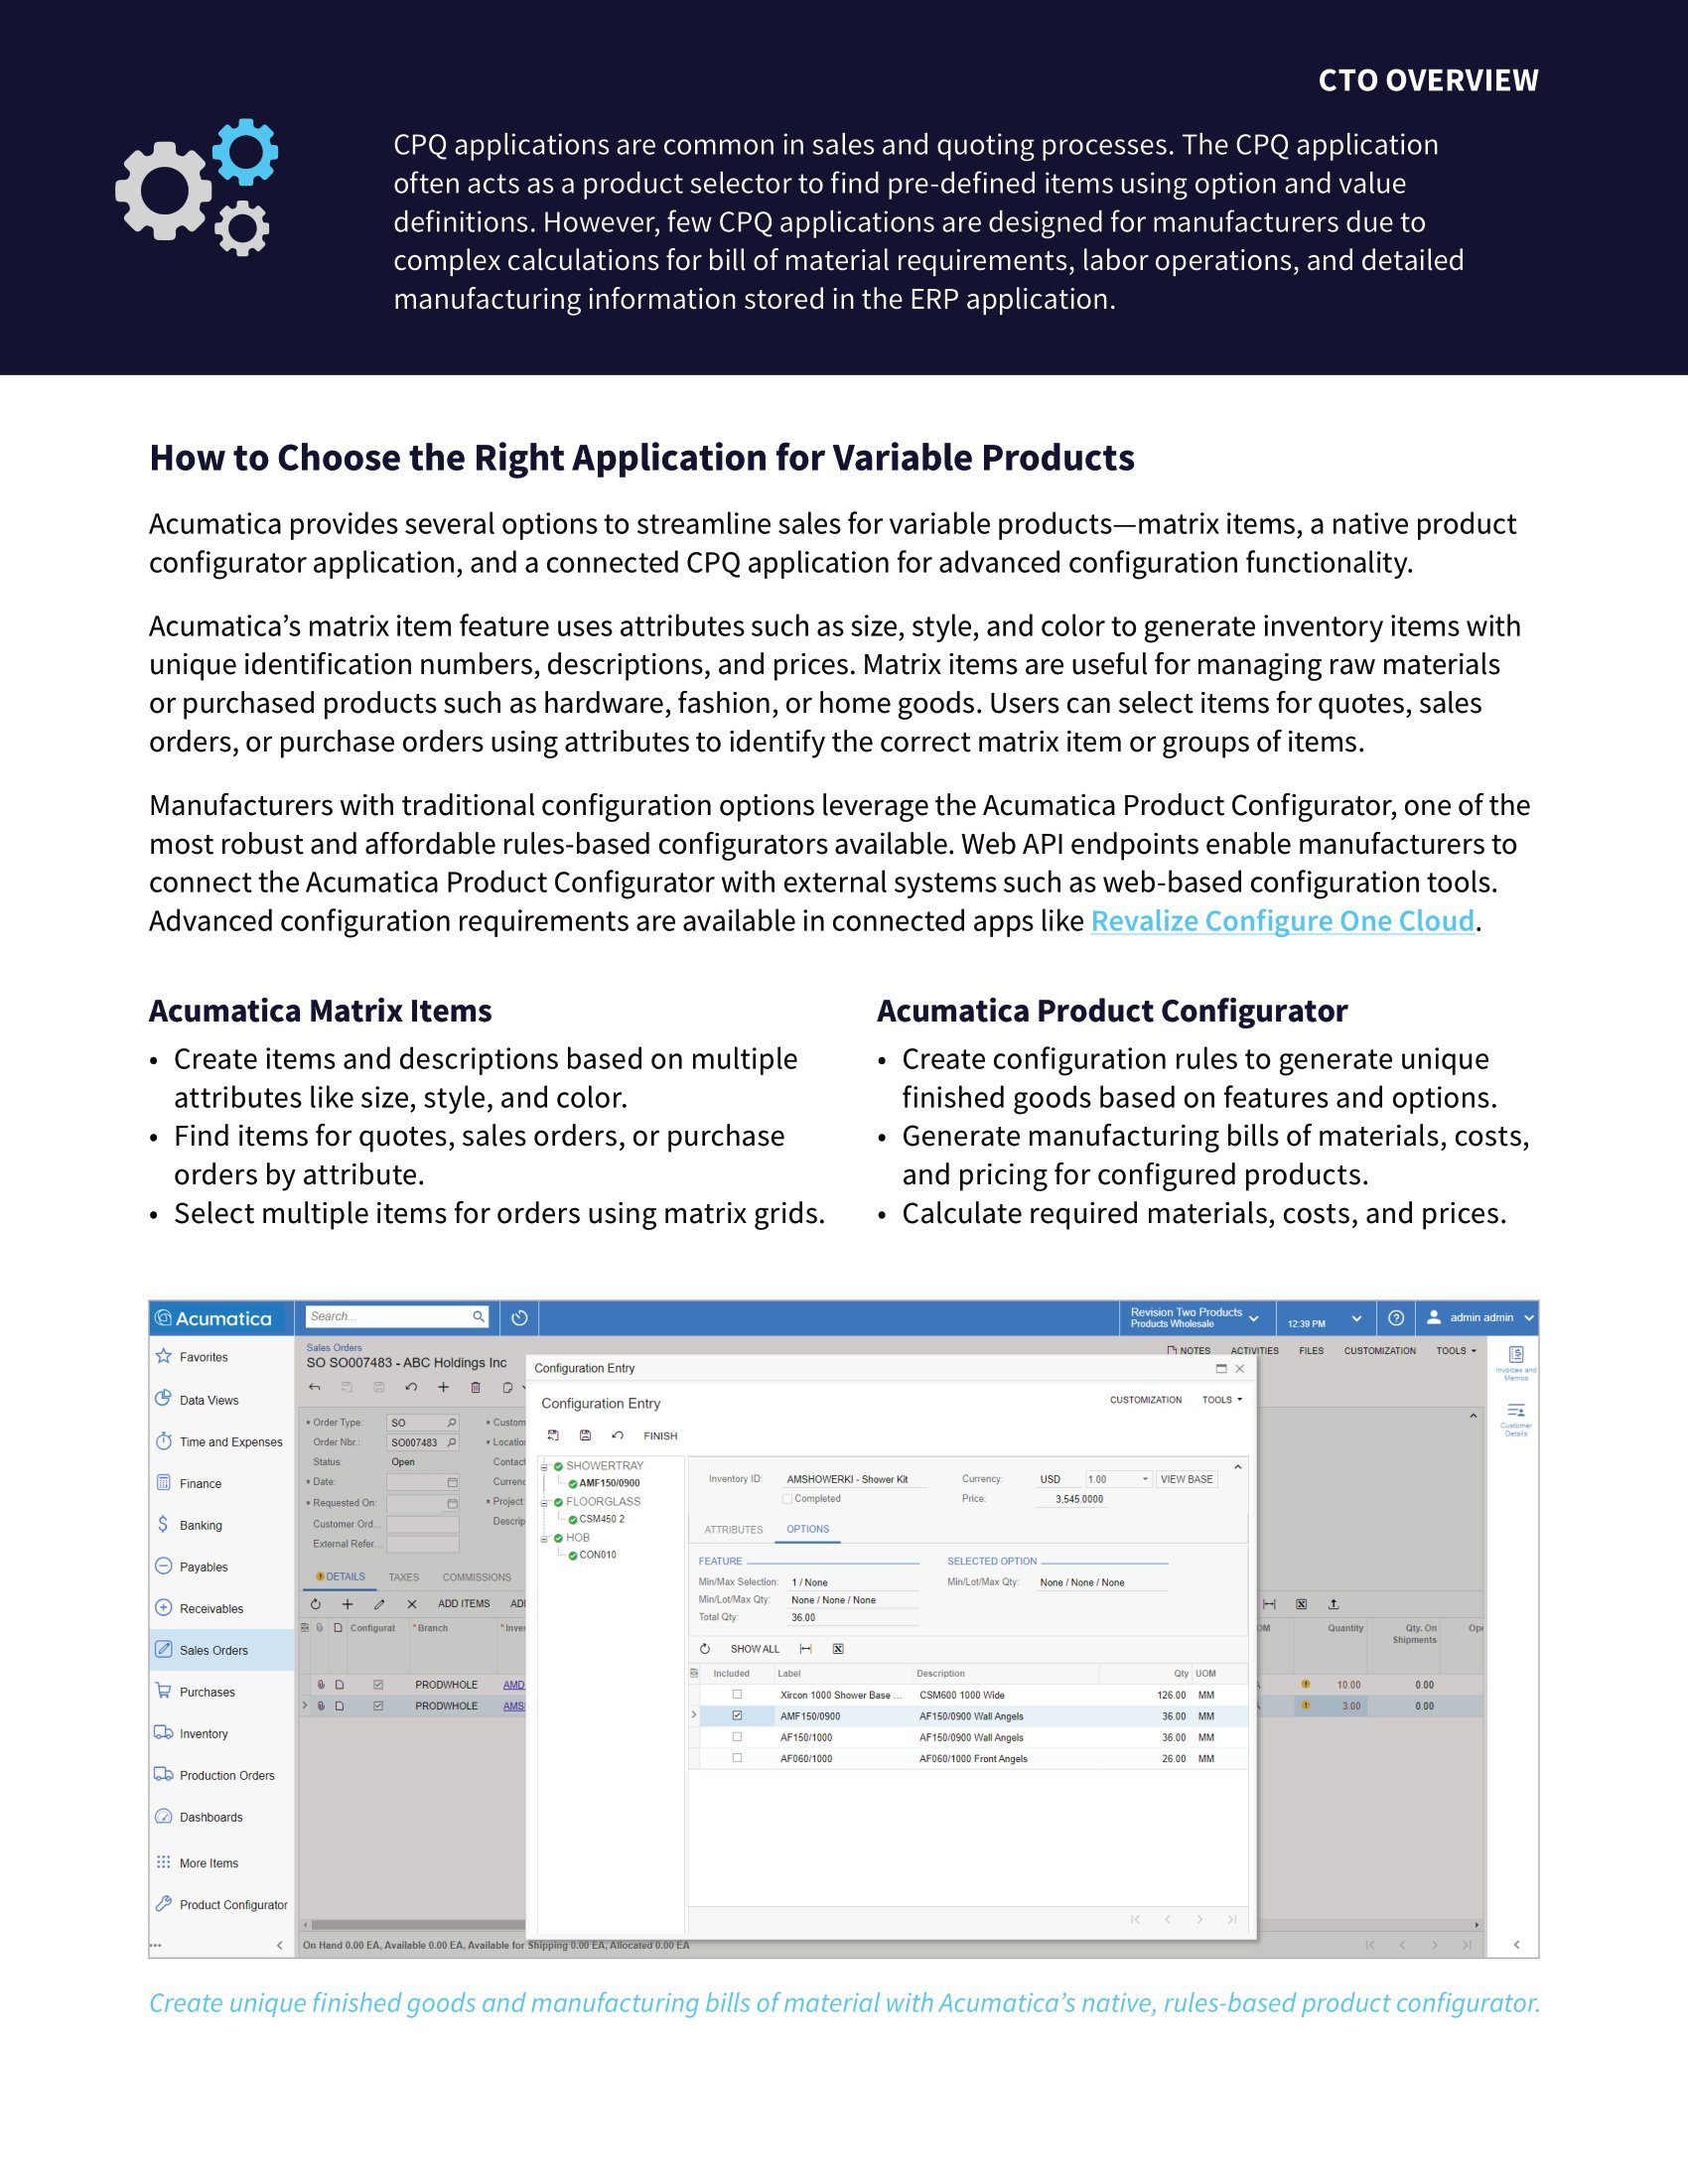 Acumatica's Configure-to-Order Manufacturing, page 1